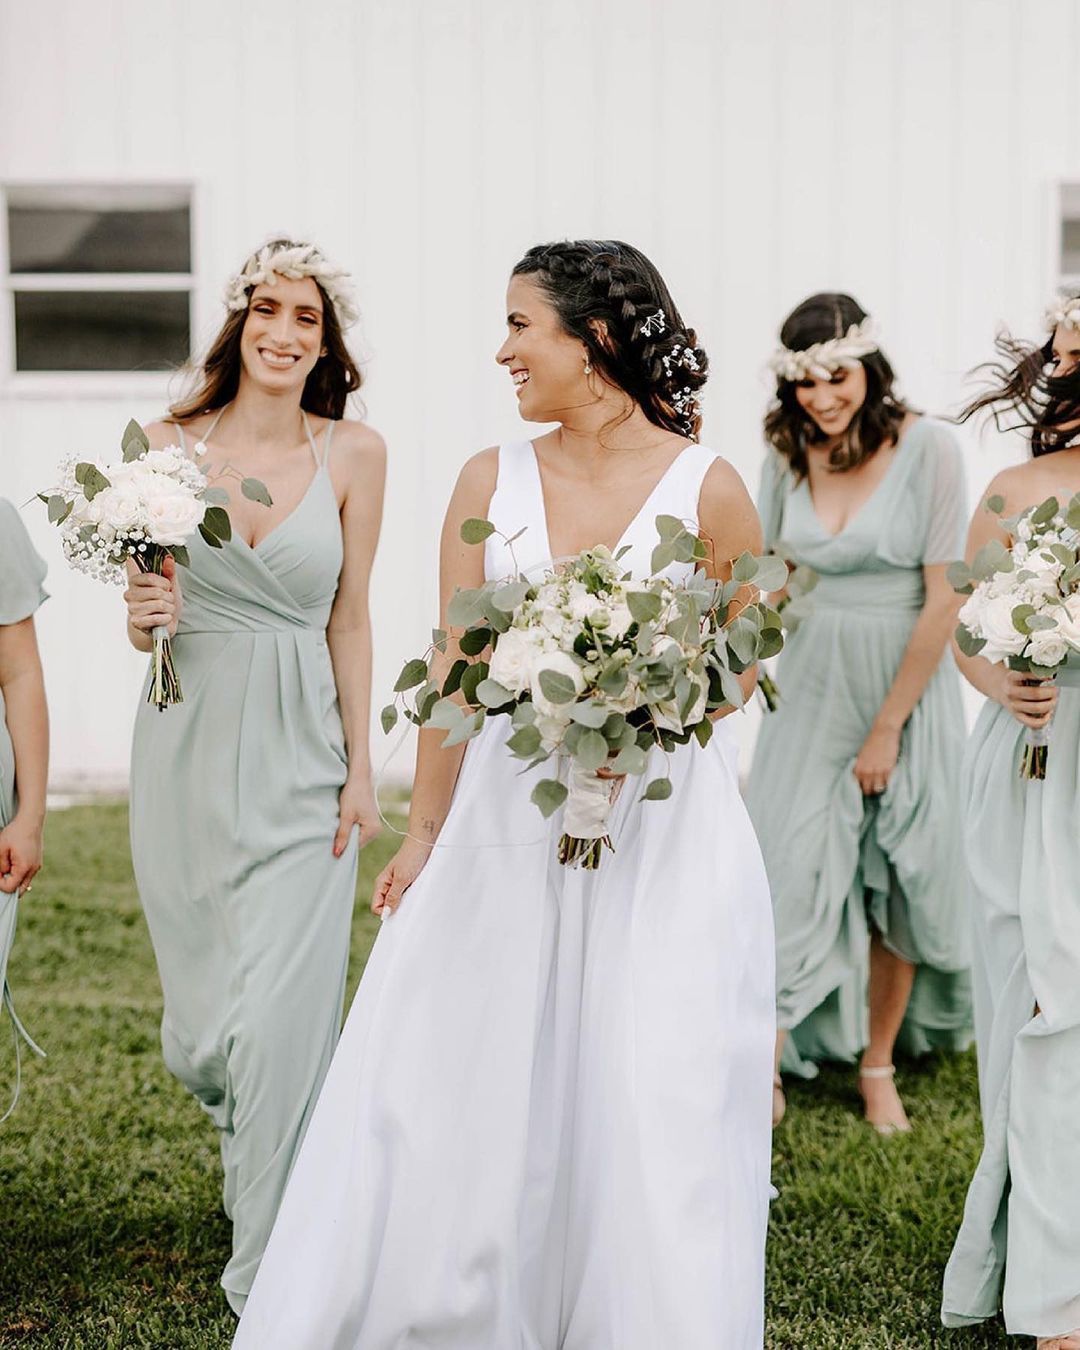 How To Have A Sage Green Wedding - Rustic Wedding Chic